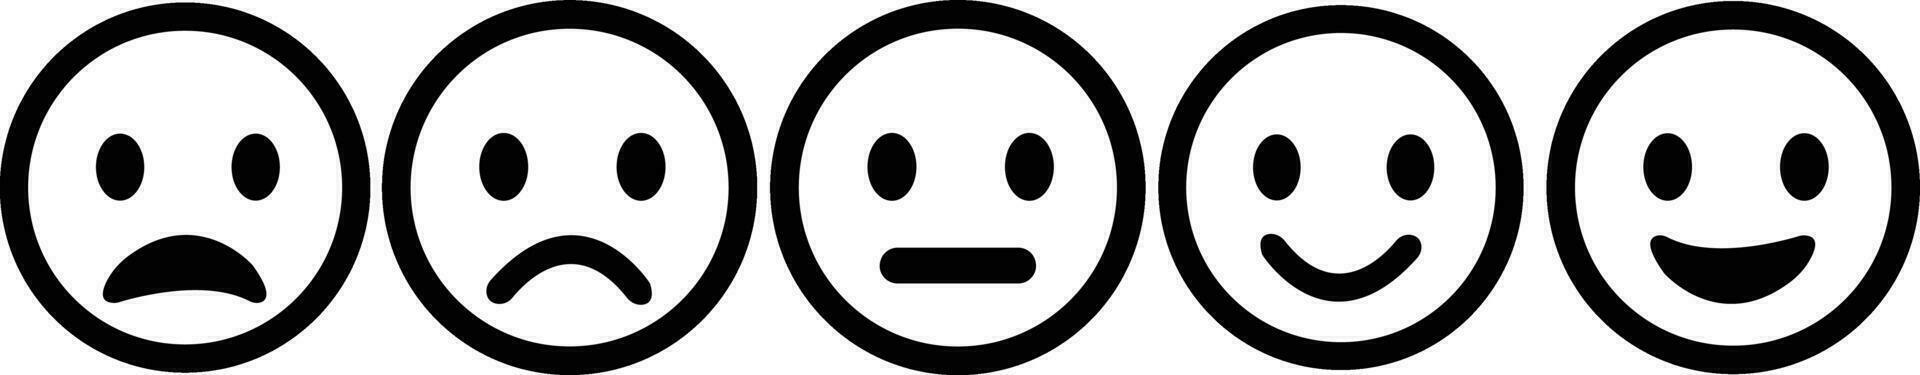 Set of different facial expression emoji face icons. Happy and sad feeling faces emoticon . Smiley and depressed emotions. Mixed expressions an mood vector